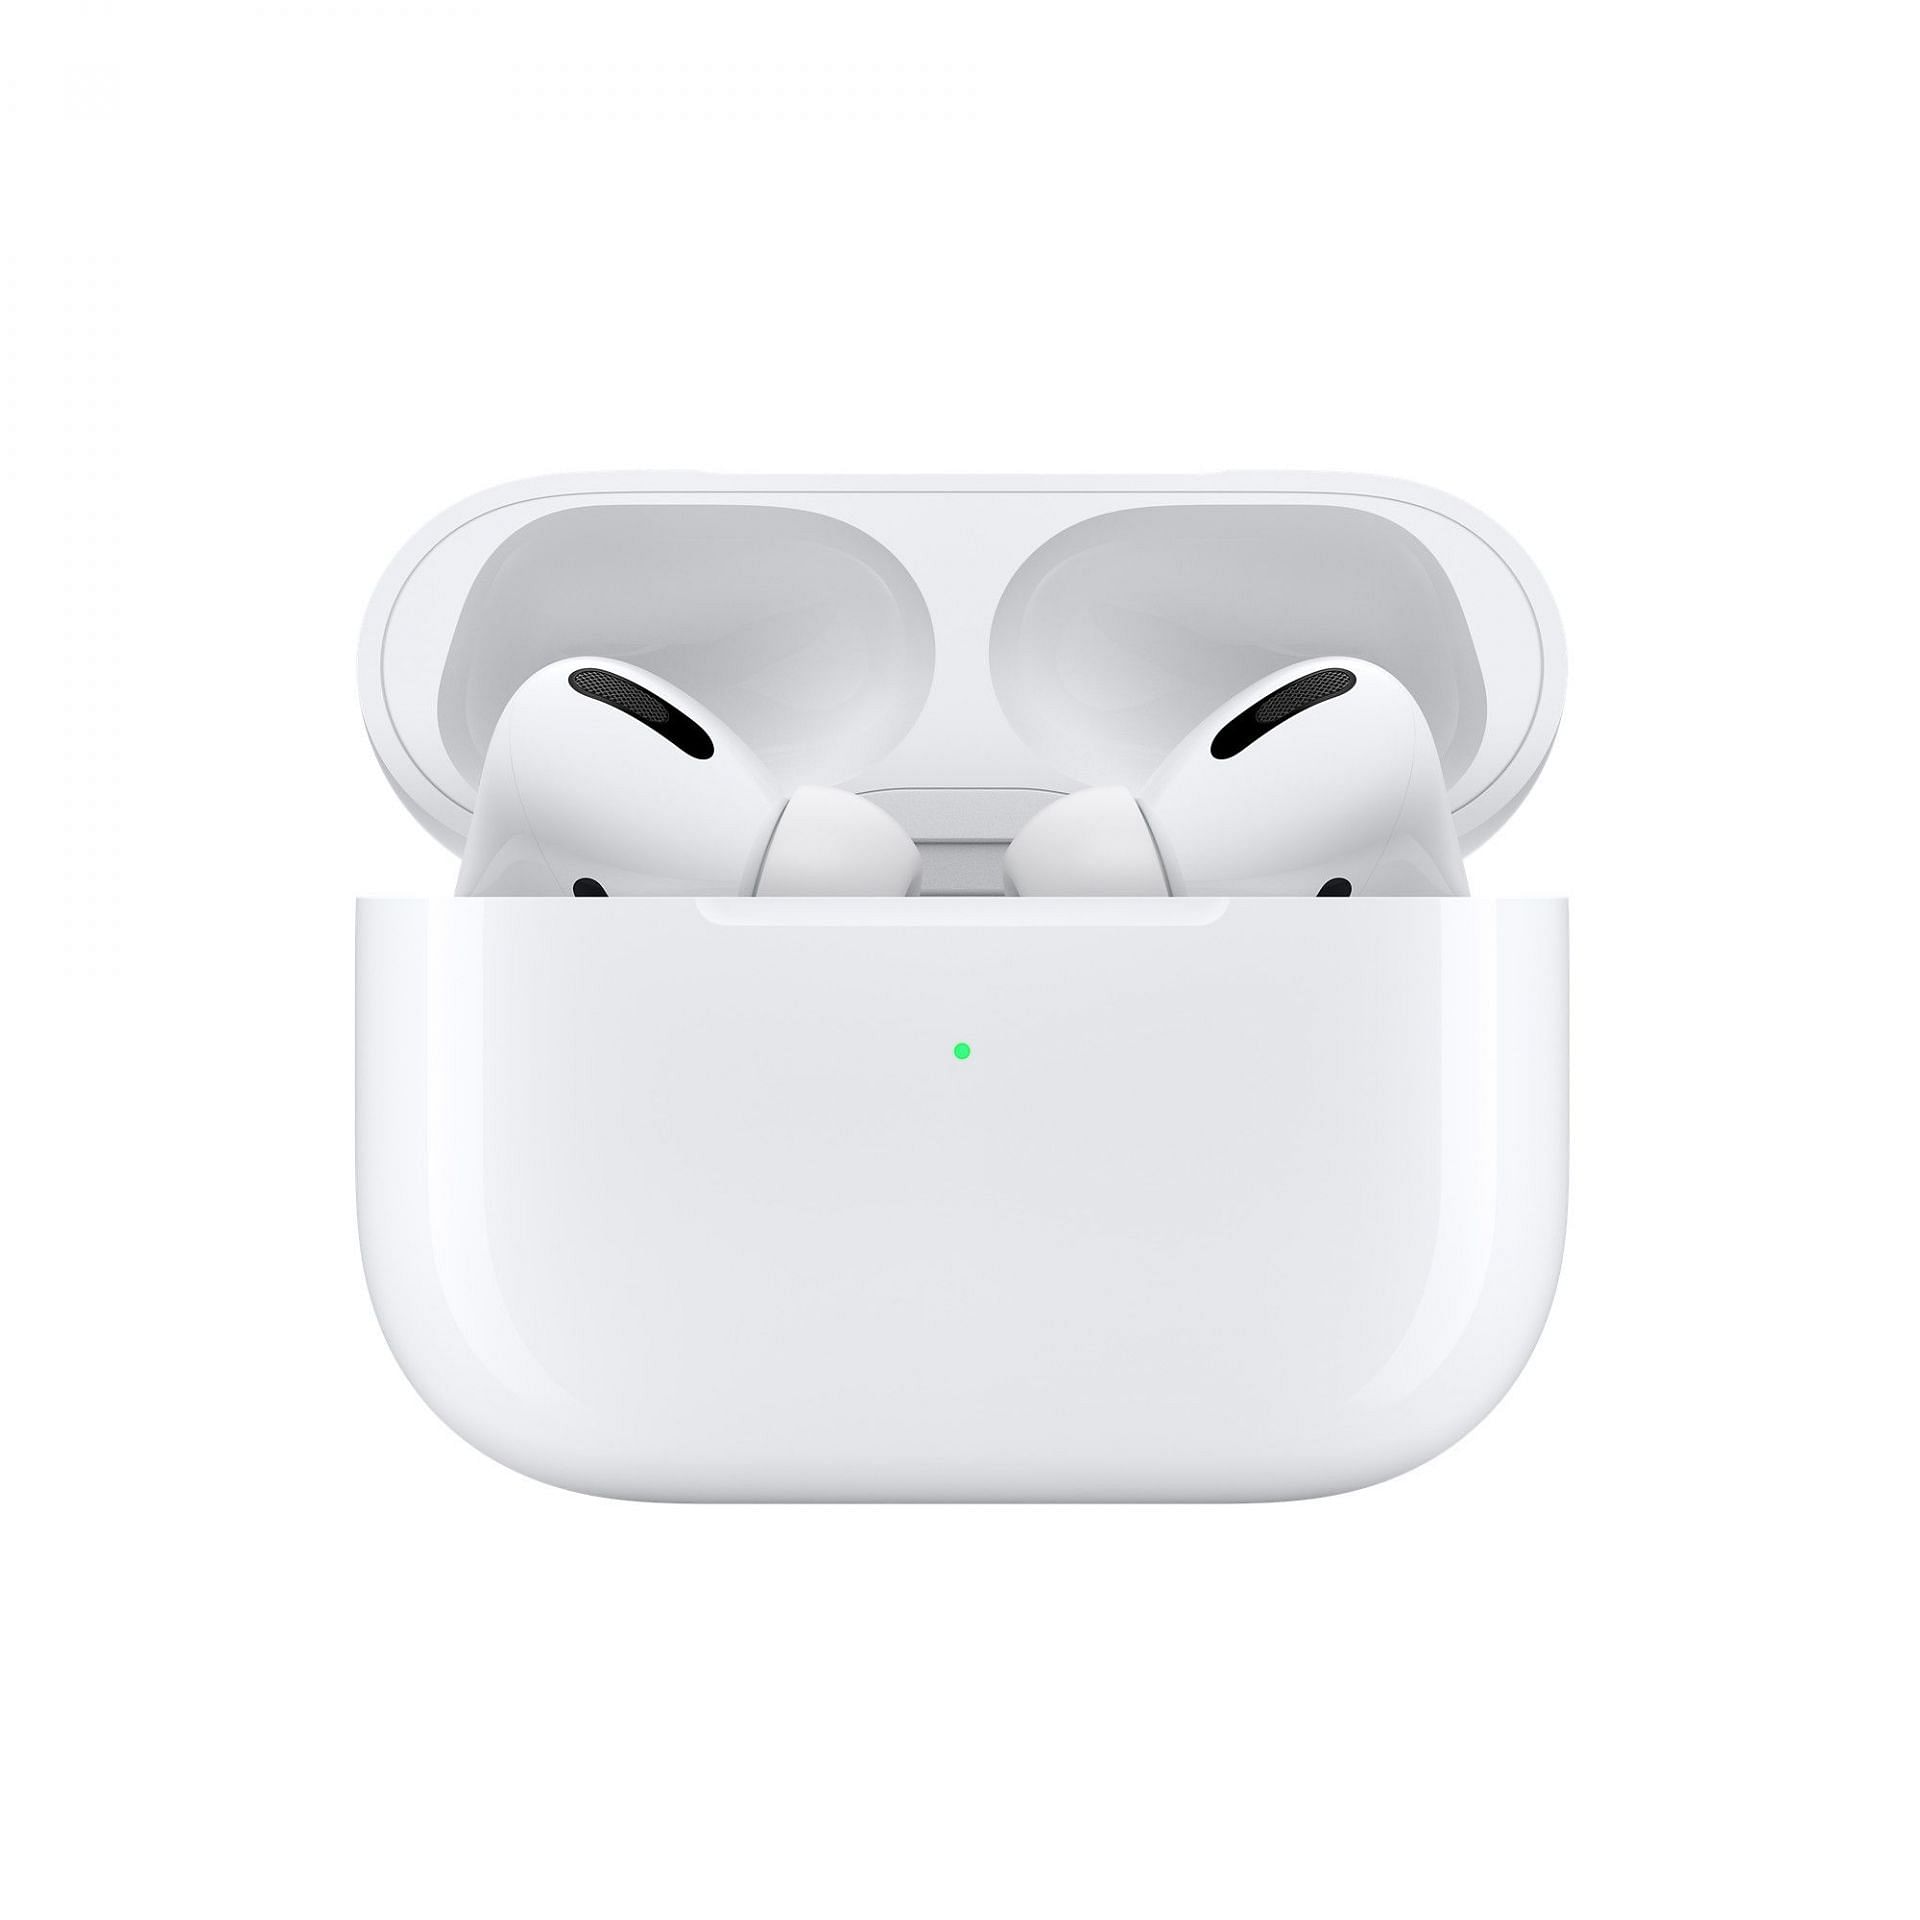 The current-gen AirPods Pro (Image via Apple)